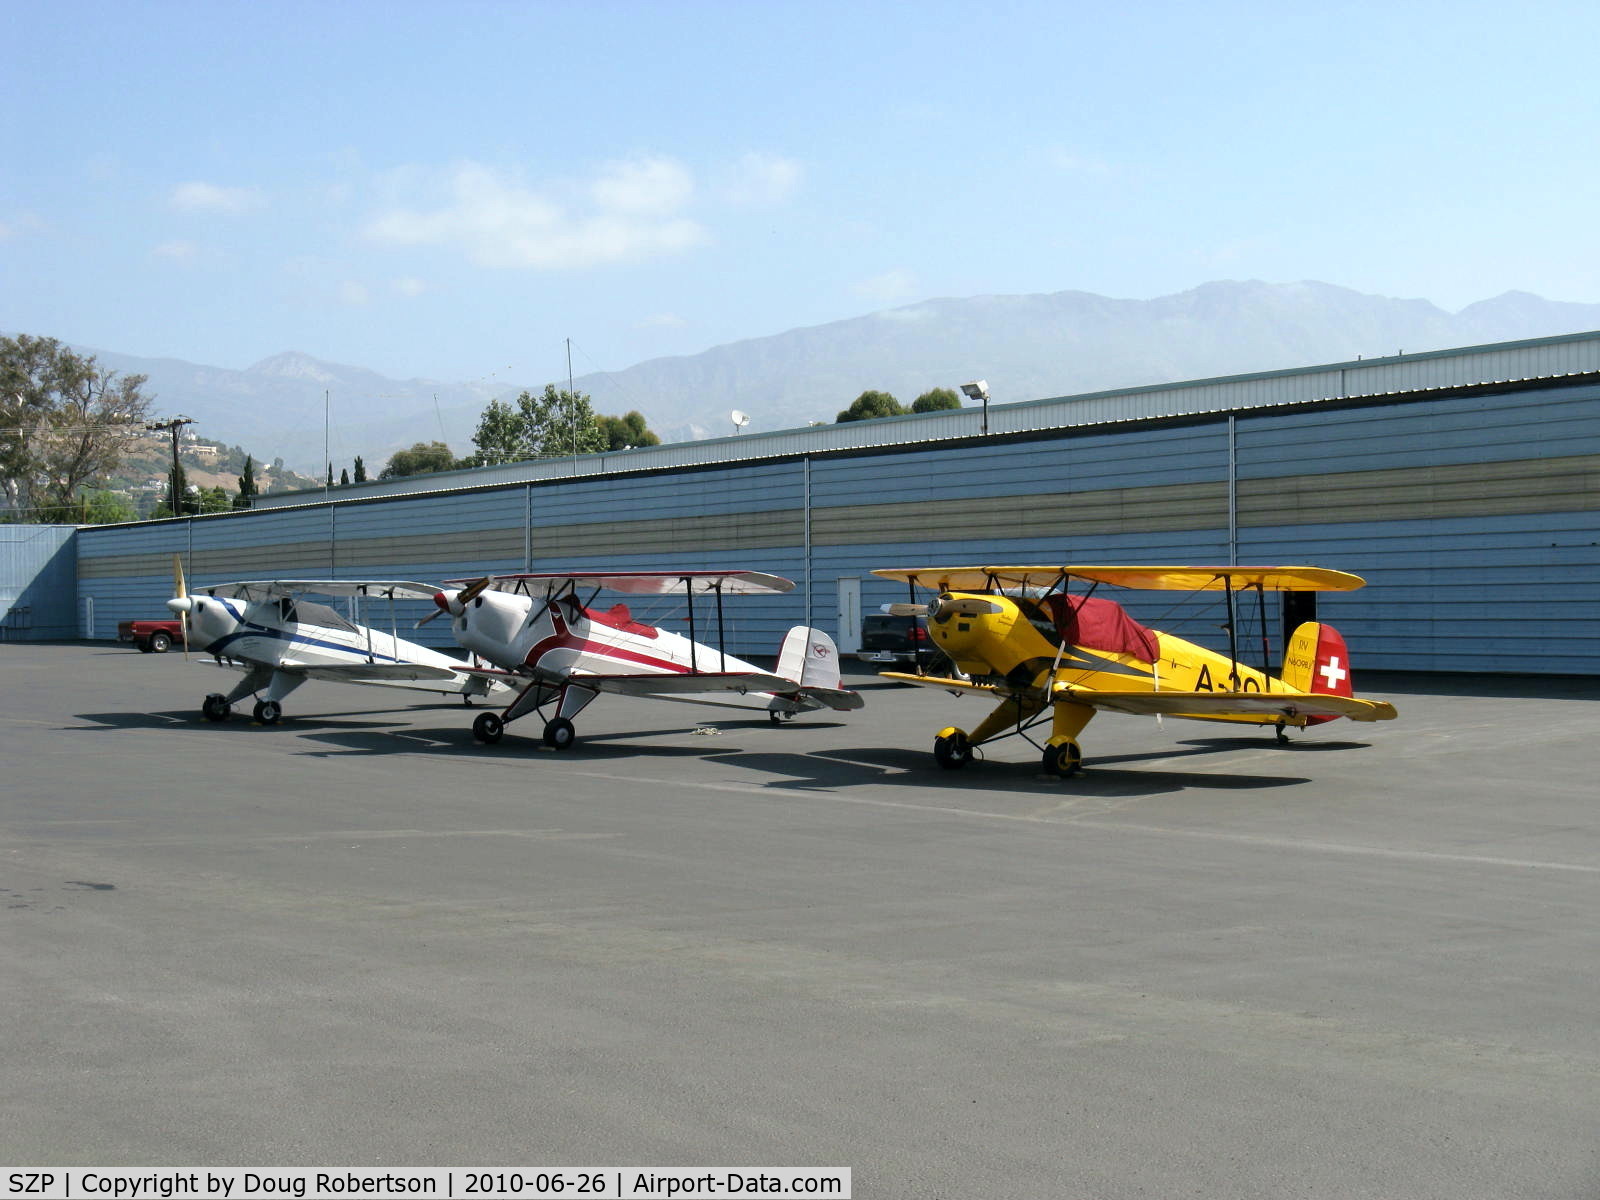 Santa Paula Airport (SZP) - National Bucker Fly-In, most were away flying during this photo 